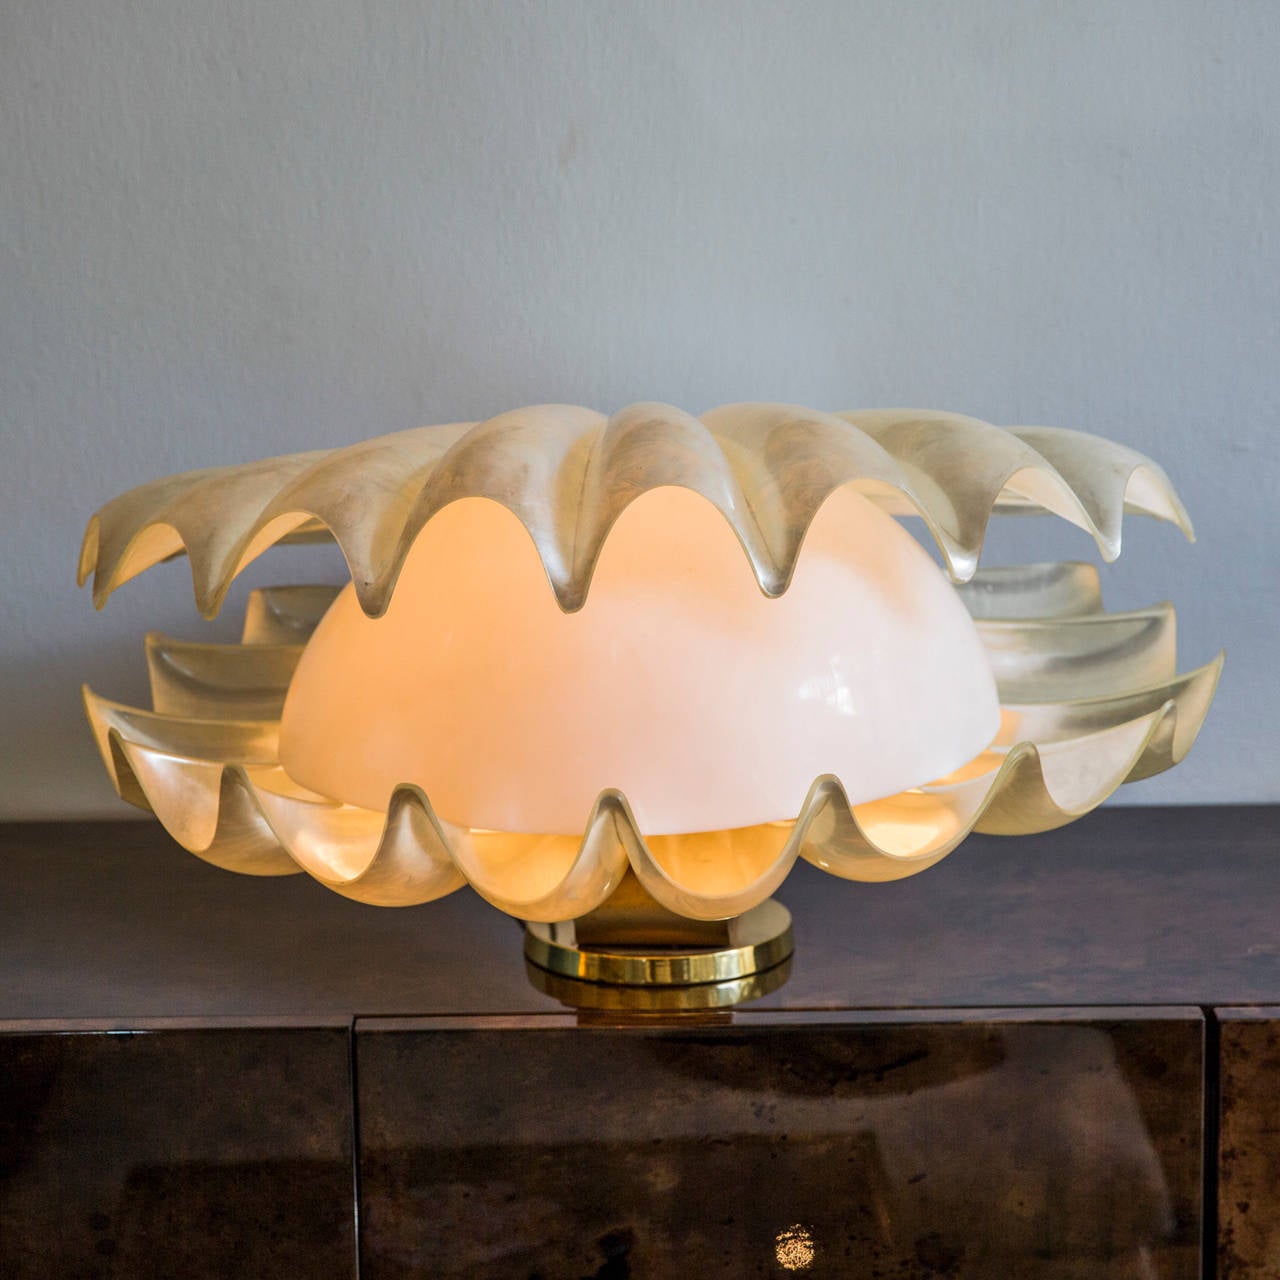 Huge clam shell lamp by Rougier, Canada, 1970. Measure: 27.5 inch.